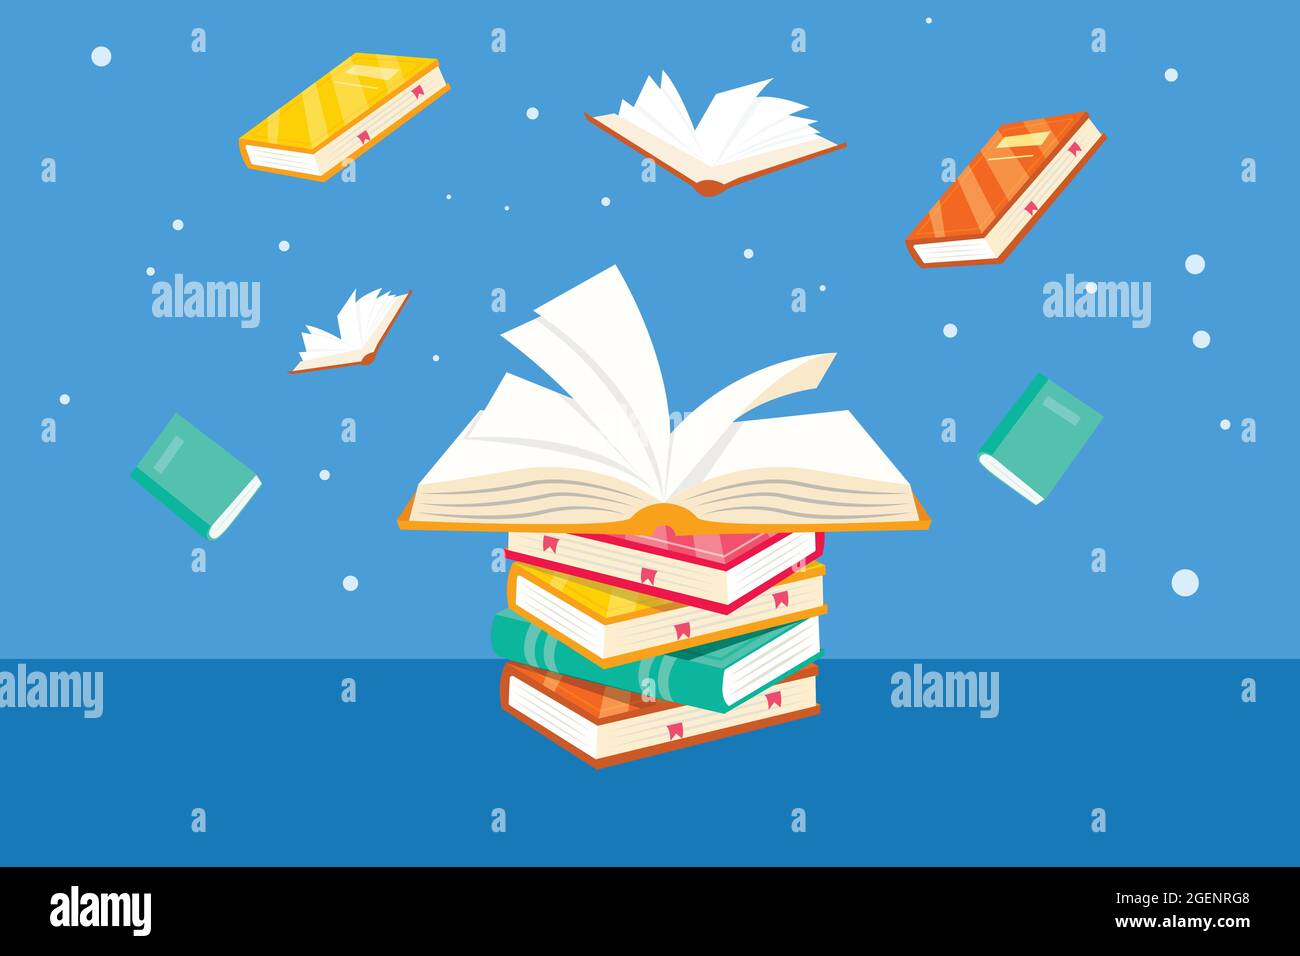 Pile of books notebook Stock Vector Images - Alamy